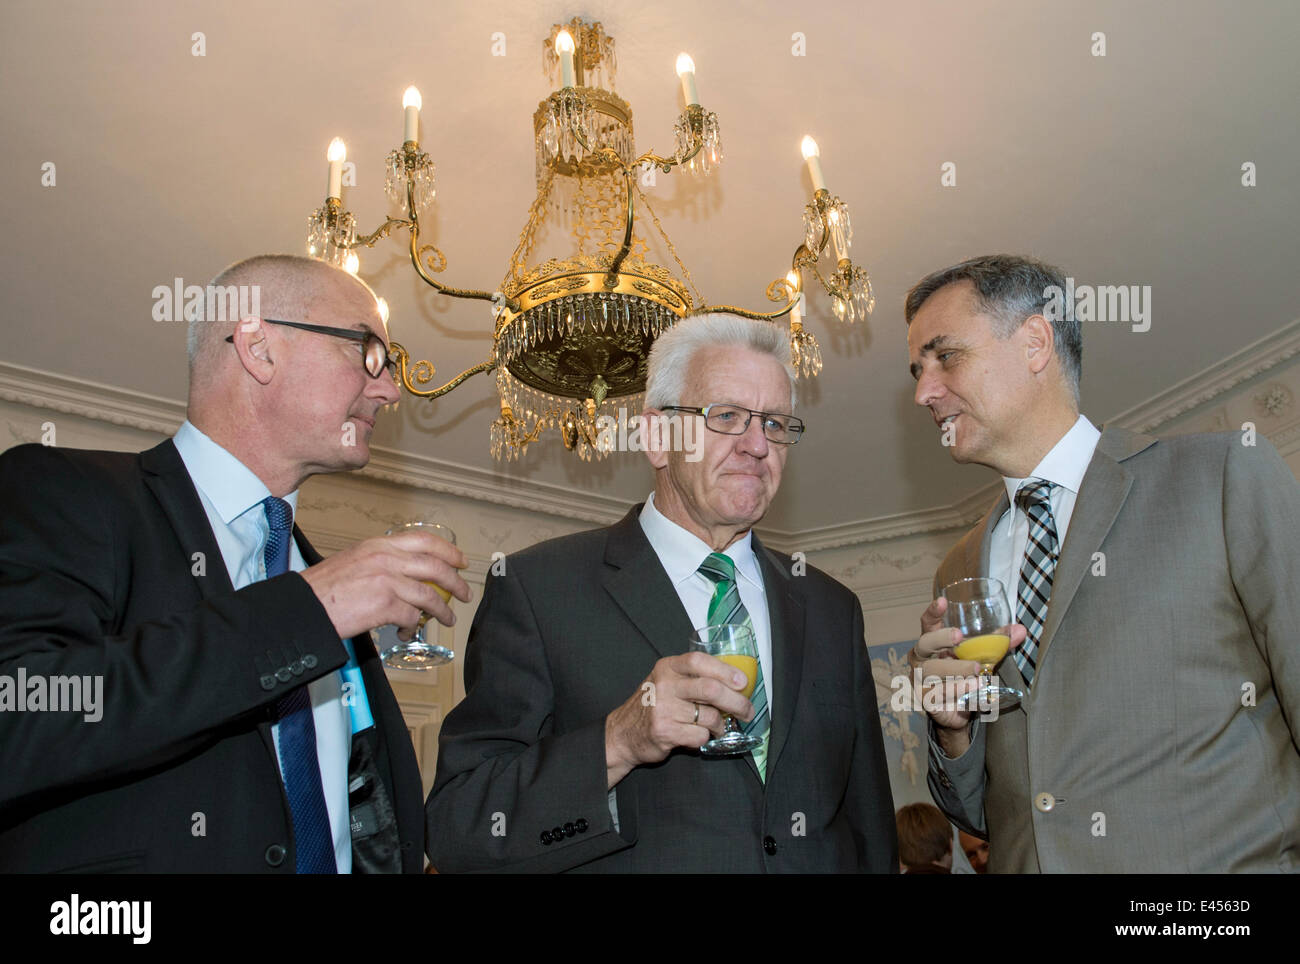 Sissach, Switzerland. 03rd July, 2014. Premier of Baden-Wuerttemberg Winfried Kretschmann (C) speaks with Isaac Reber (L), governor of the canton Basel-Land and Guy Morin (R), governor of the canton Basel-Stadt at Ebenrain Palace in Sissach, Switzerland, 03 July 2014. Kretschmann is on a three-day trip to the region. Photo: PATRICK SEEGER/dpa/Alamy Live News Stock Photo